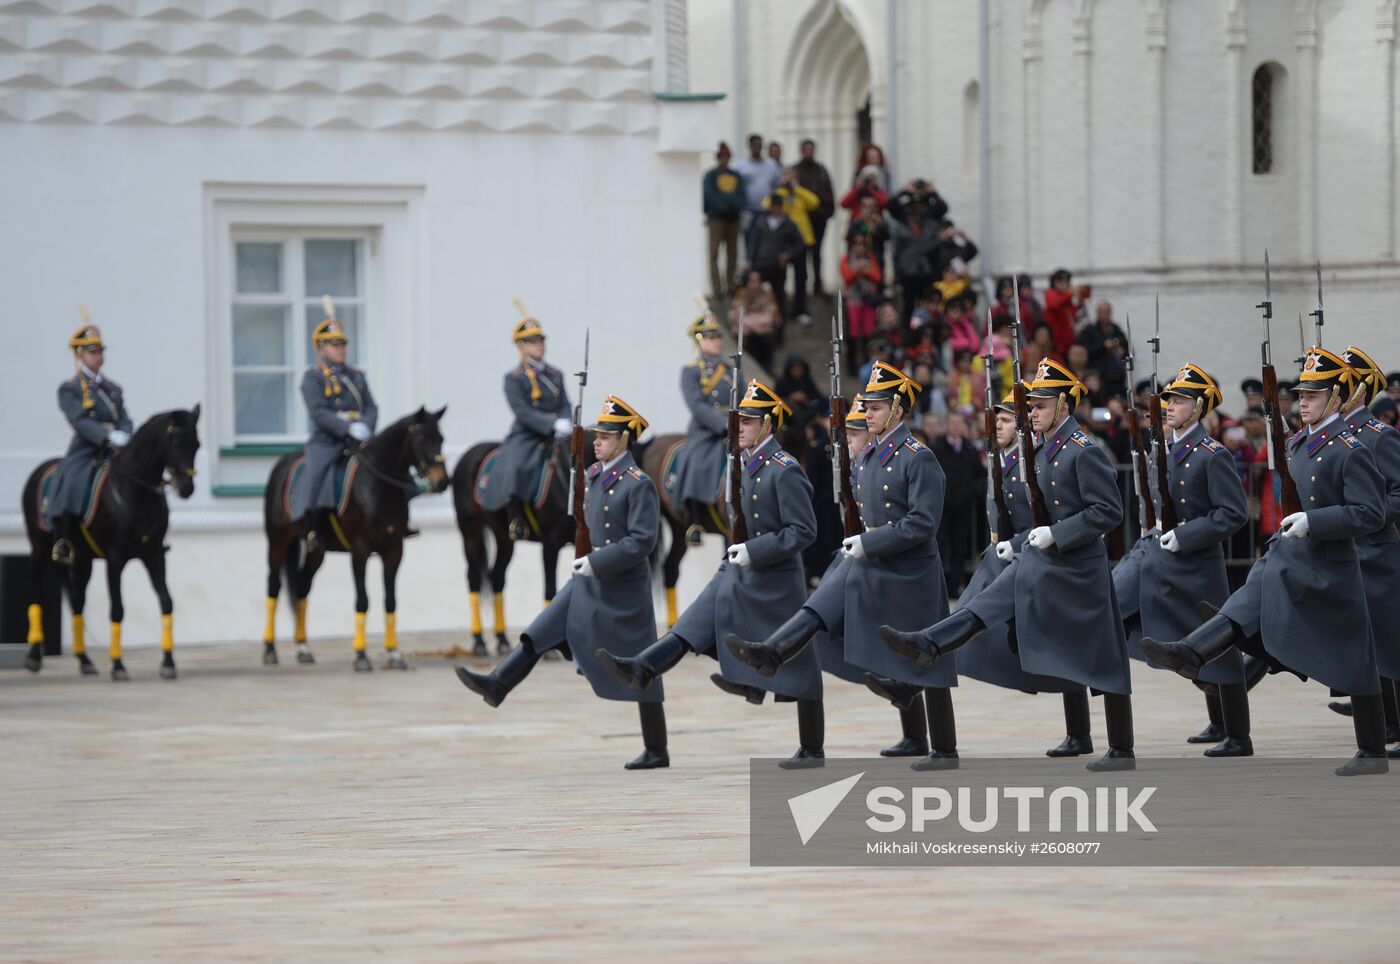 Presidential Regiment at horse and foot guard mounting ceremony